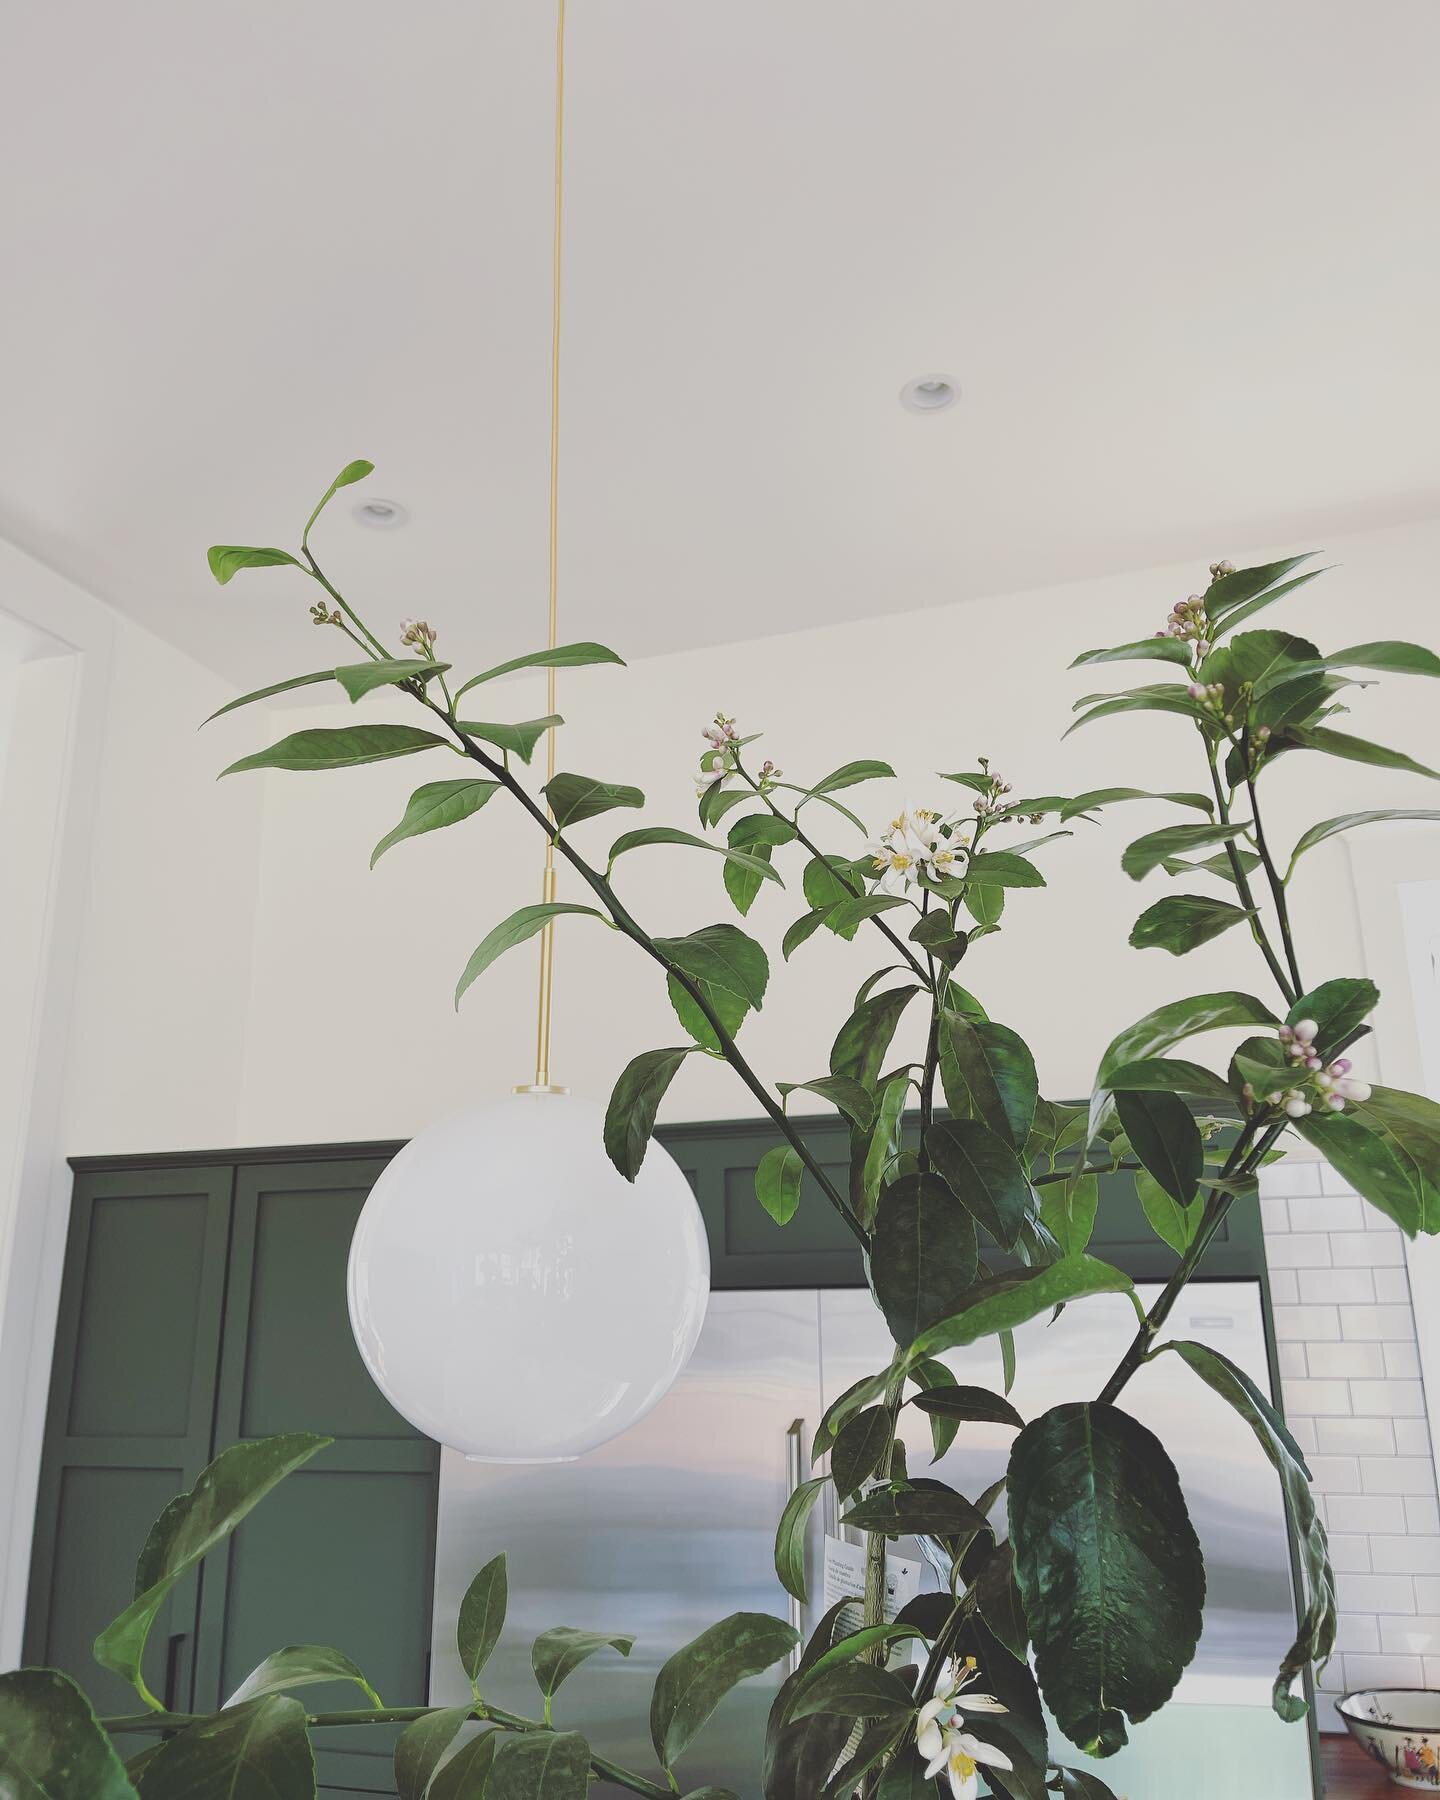 Easing my way back to social media after an 8-week hiatus and it was good for the soul. Hi friends. Our new kitchen and the lemon tree wanted to say hello, too. 🍋 #fairmount #nearsouthside #fortworth